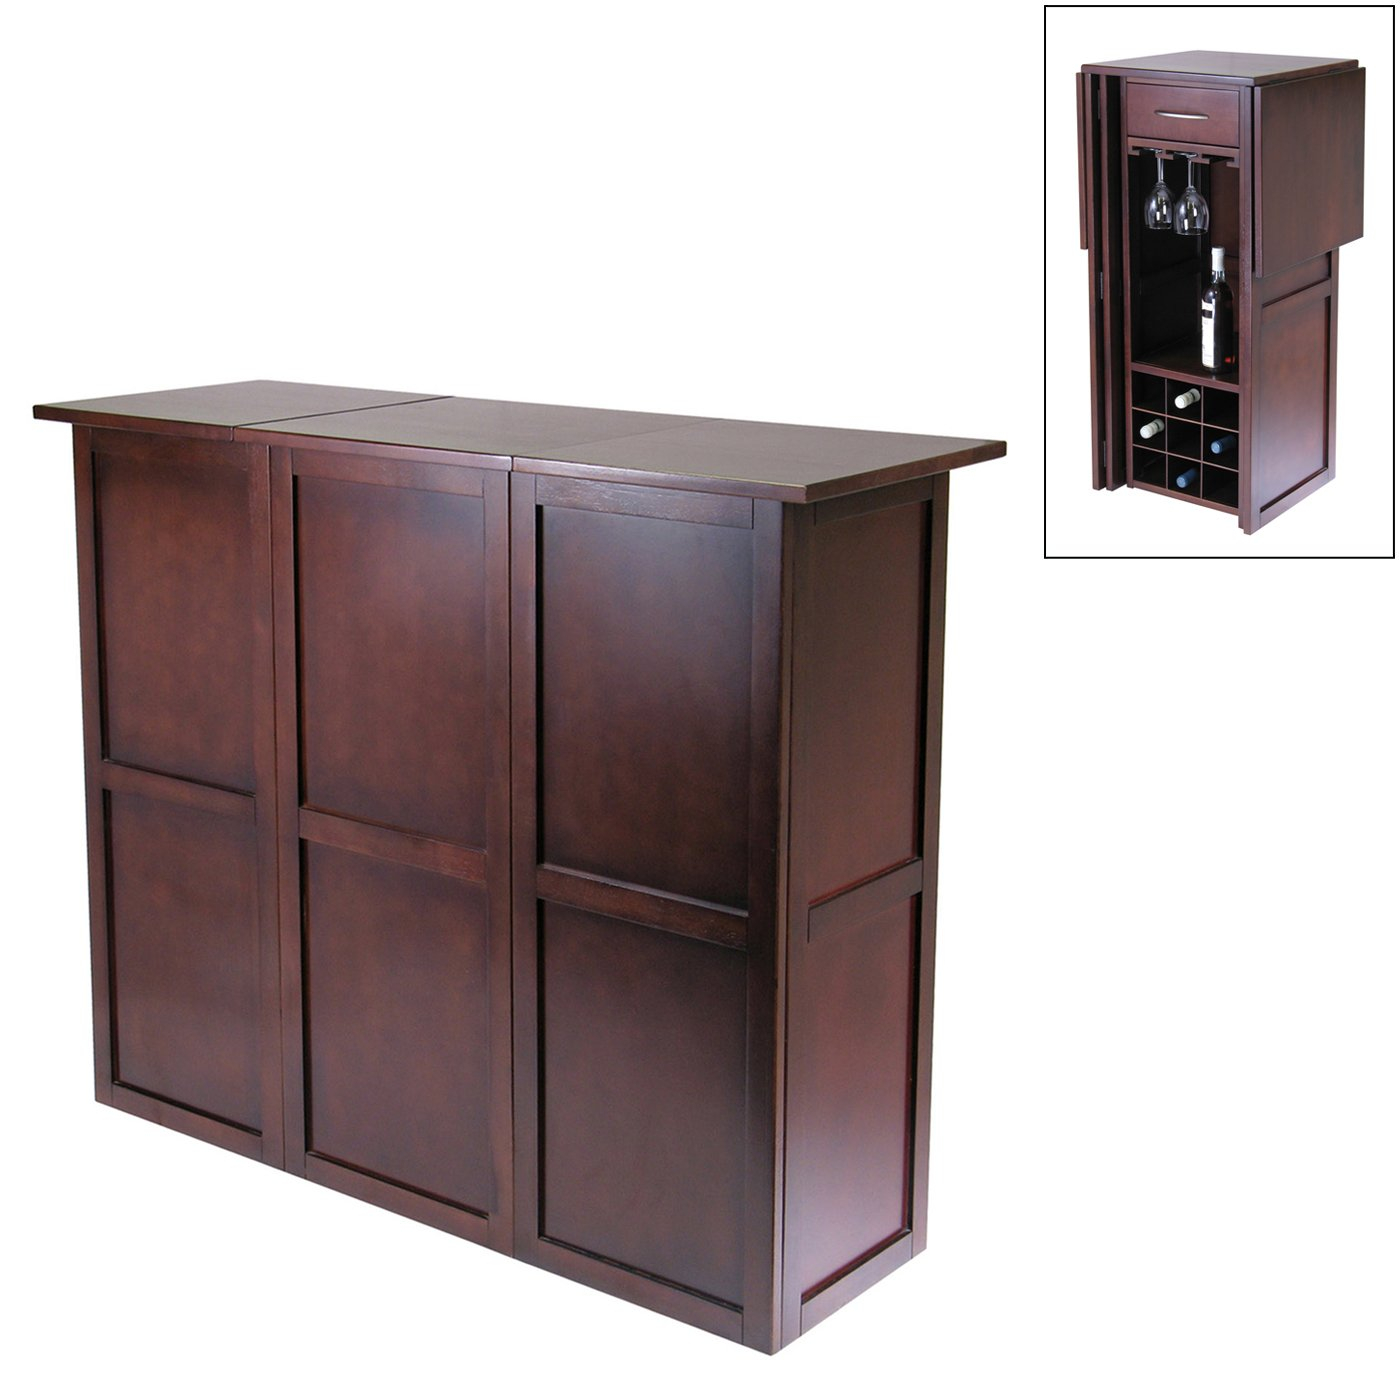 About Winsome Newport Expandable Wine Bar Home Bars regarding sizing 1400 X 1400